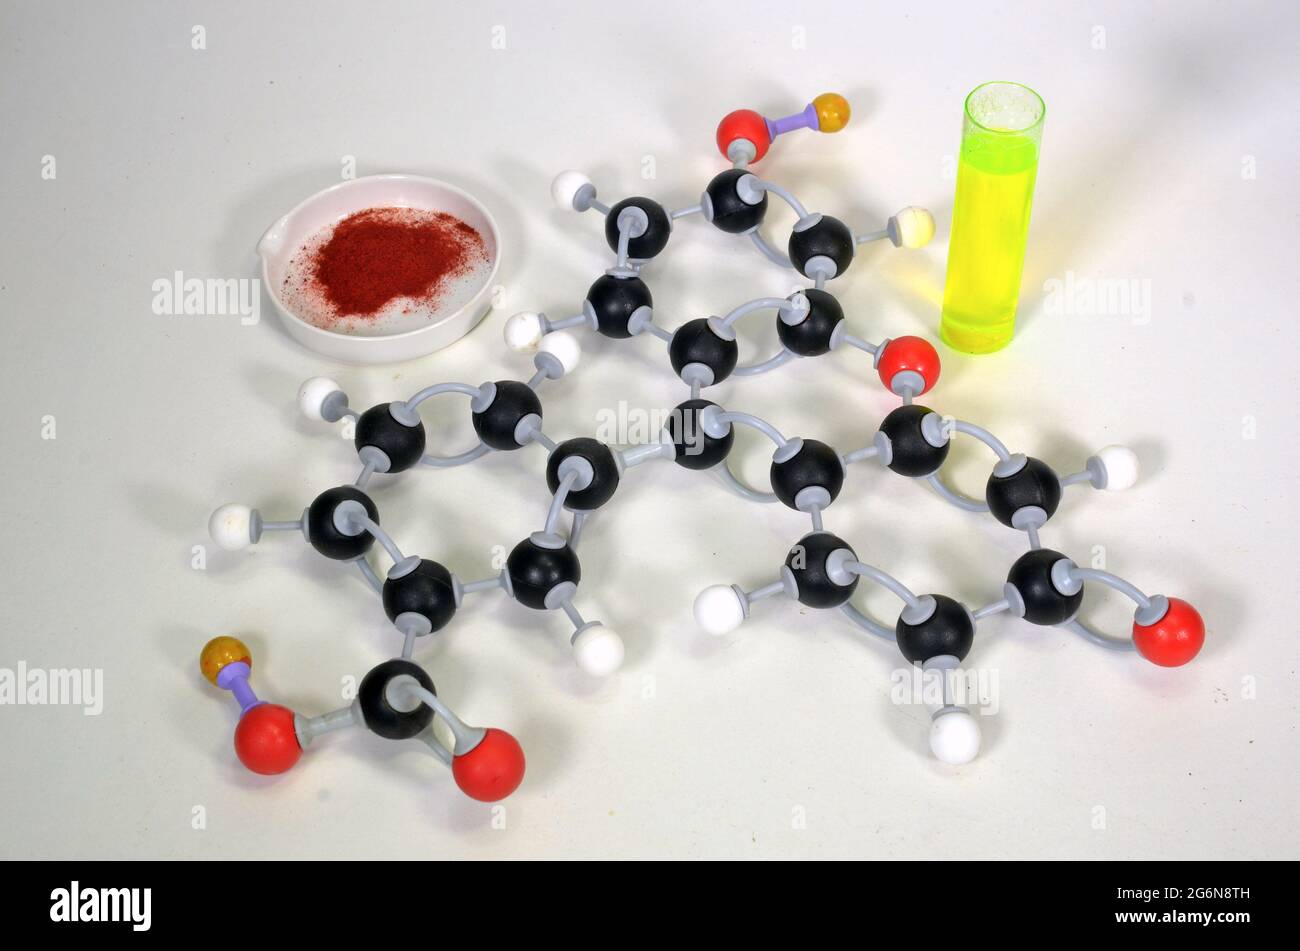 Molecule model of Uranin, this pigment is an orange powder but becomes green when dissolved in water. White is hydrogen, black is carbon, red is oxyge Stock Photo